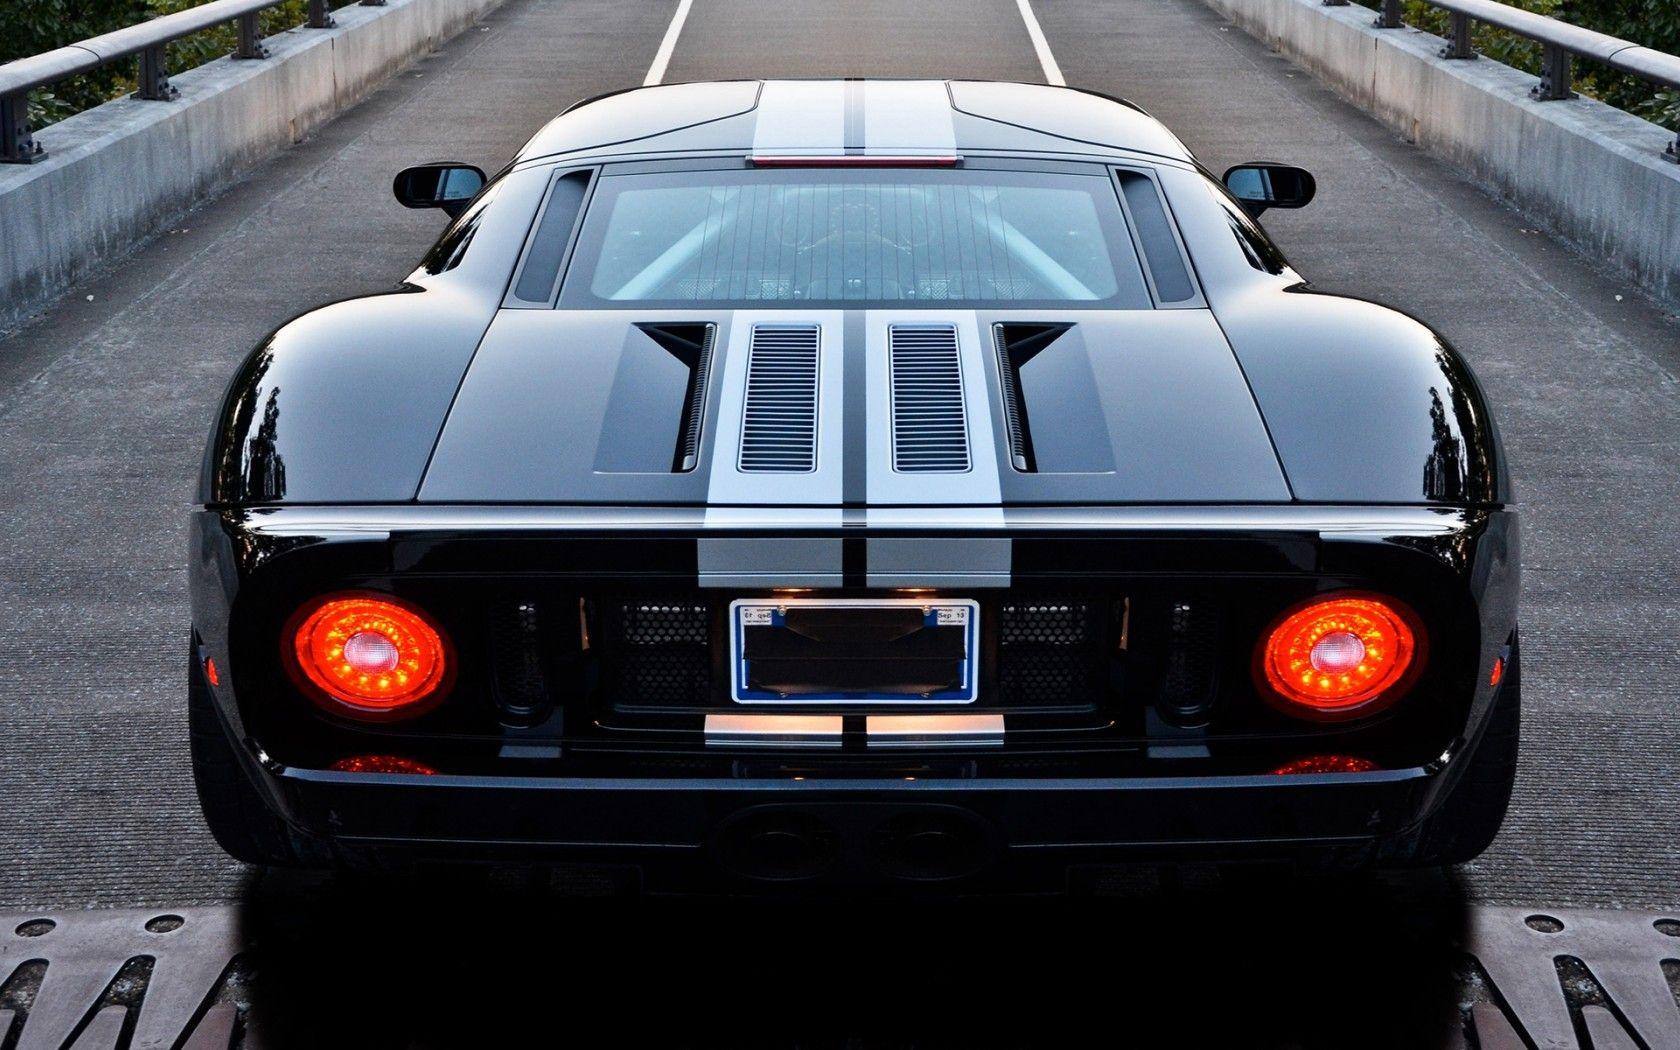 Ford GT Car Awesome HD Wallpaper(High Resolution) HD Wallpaper. Ford gt, HD cool wallpaper, Black car wallpaper